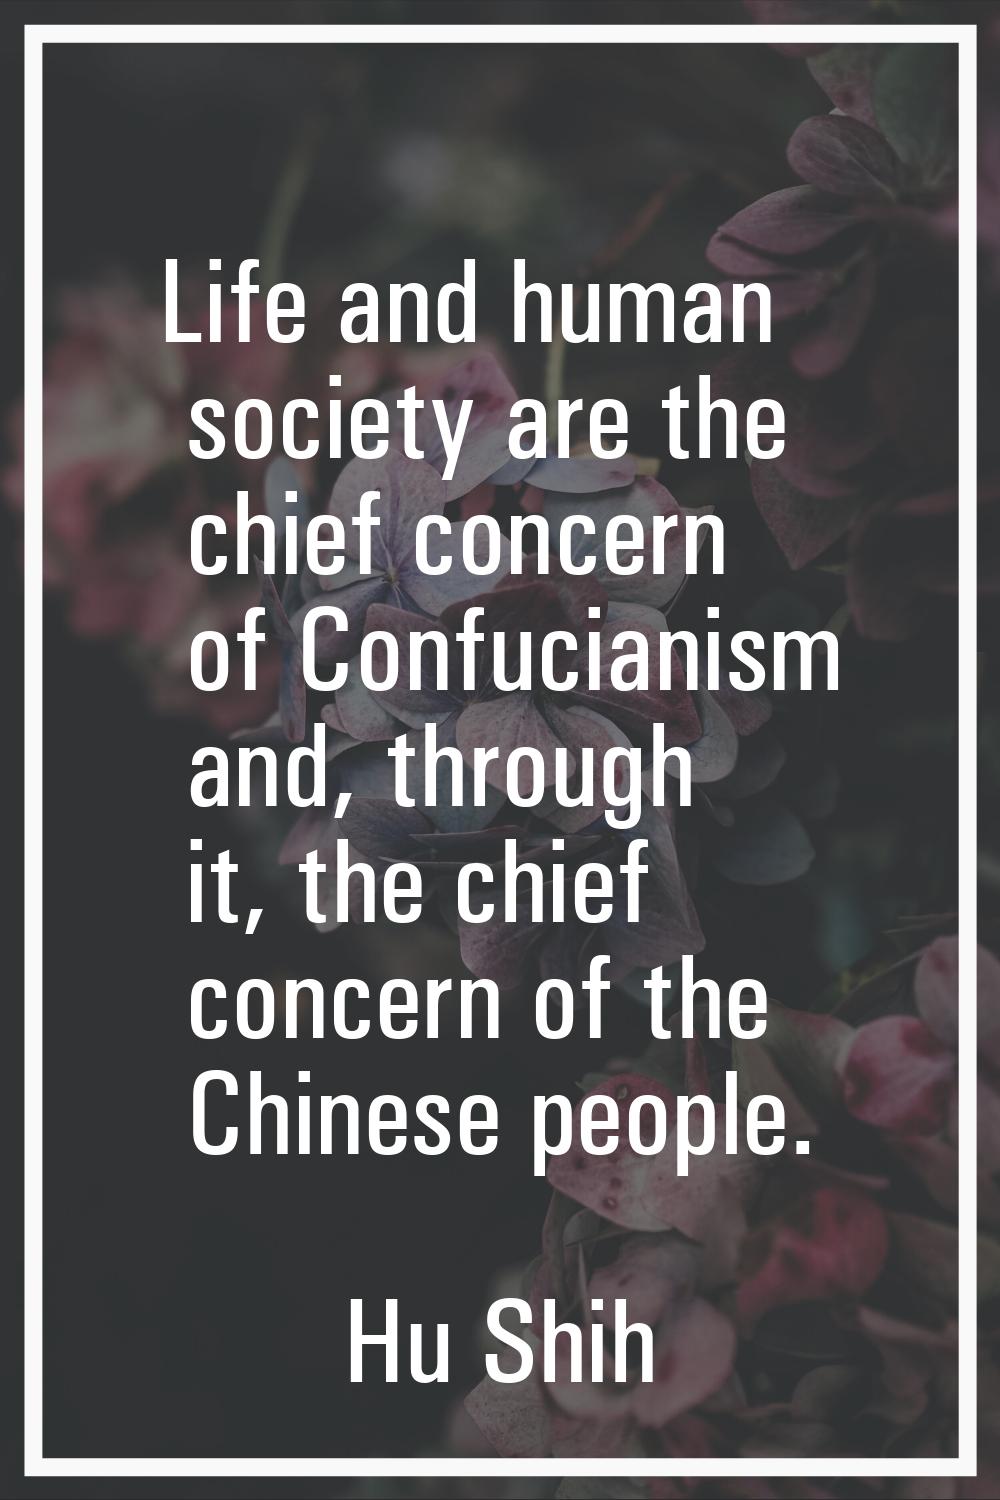 Life and human society are the chief concern of Confucianism and, through it, the chief concern of 